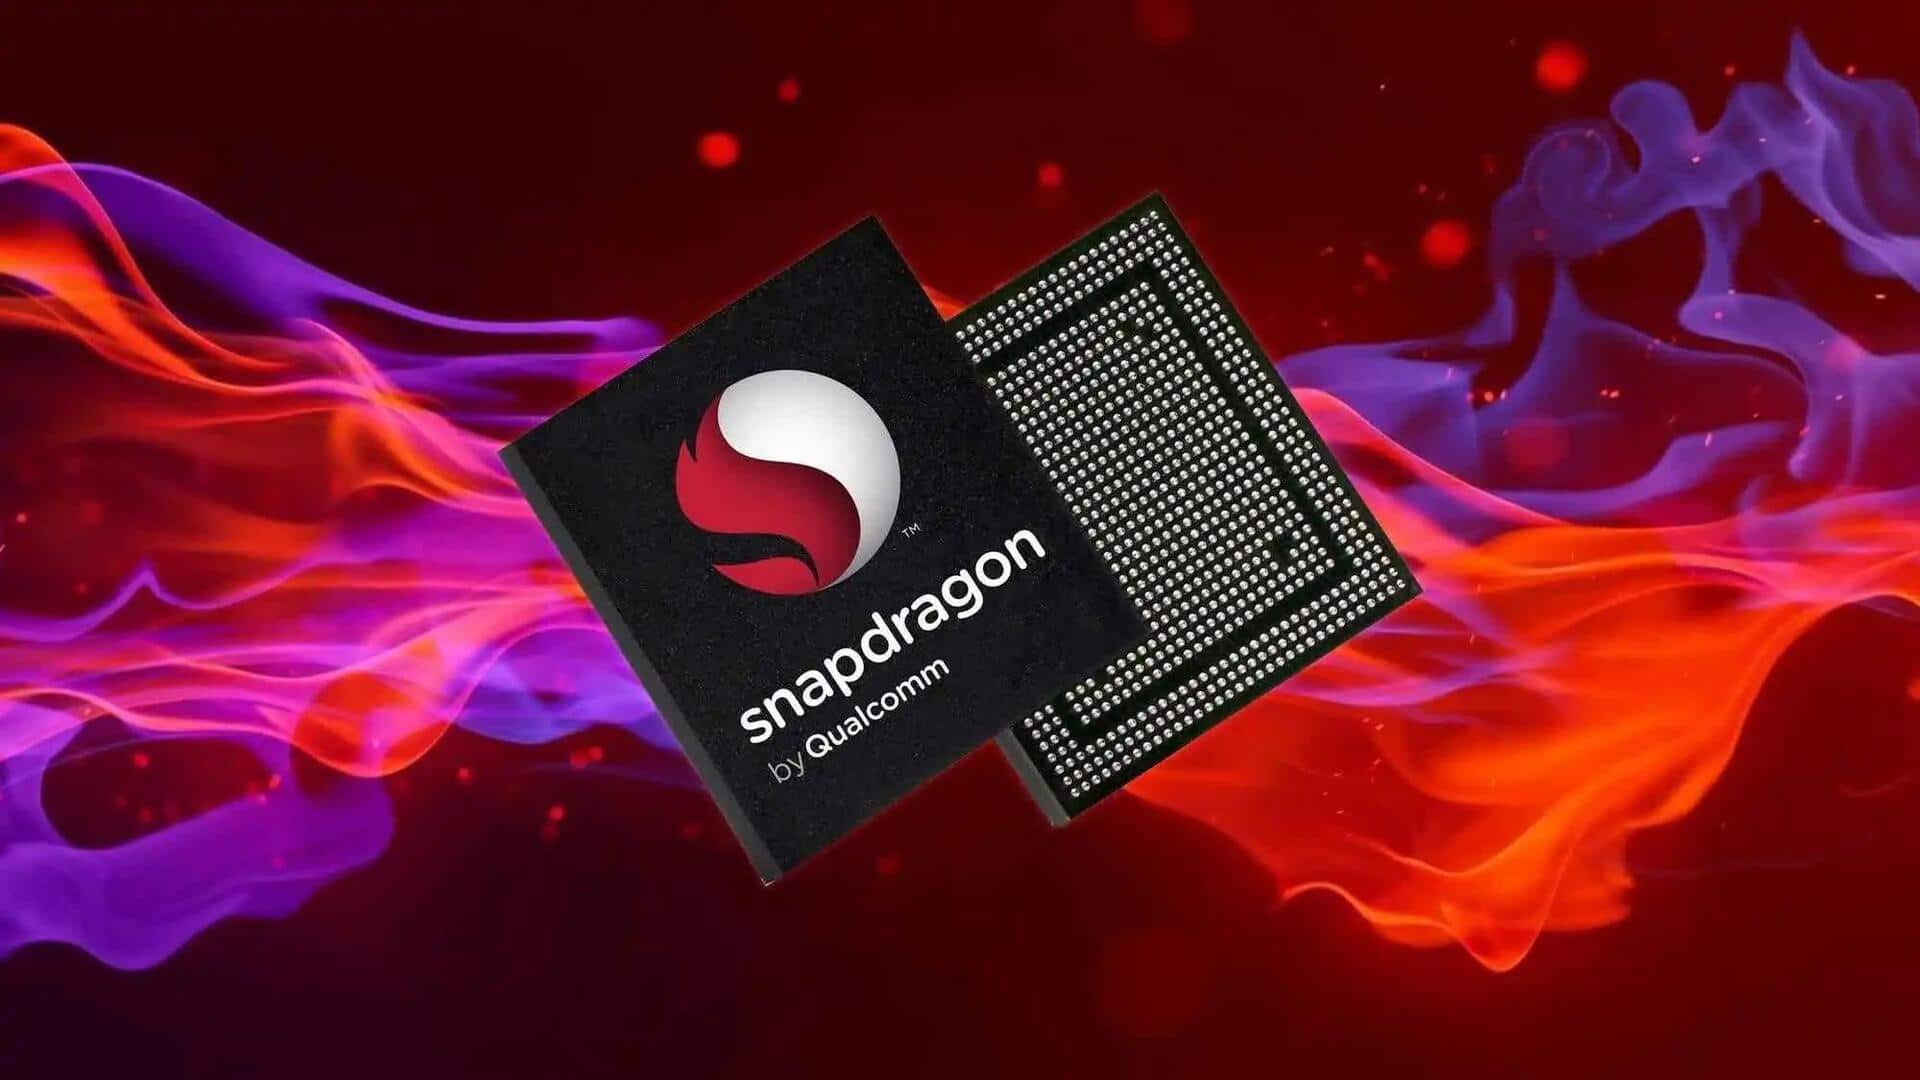 Qualcomm's upcoming flagship SoC set to deliver superior graphics performance